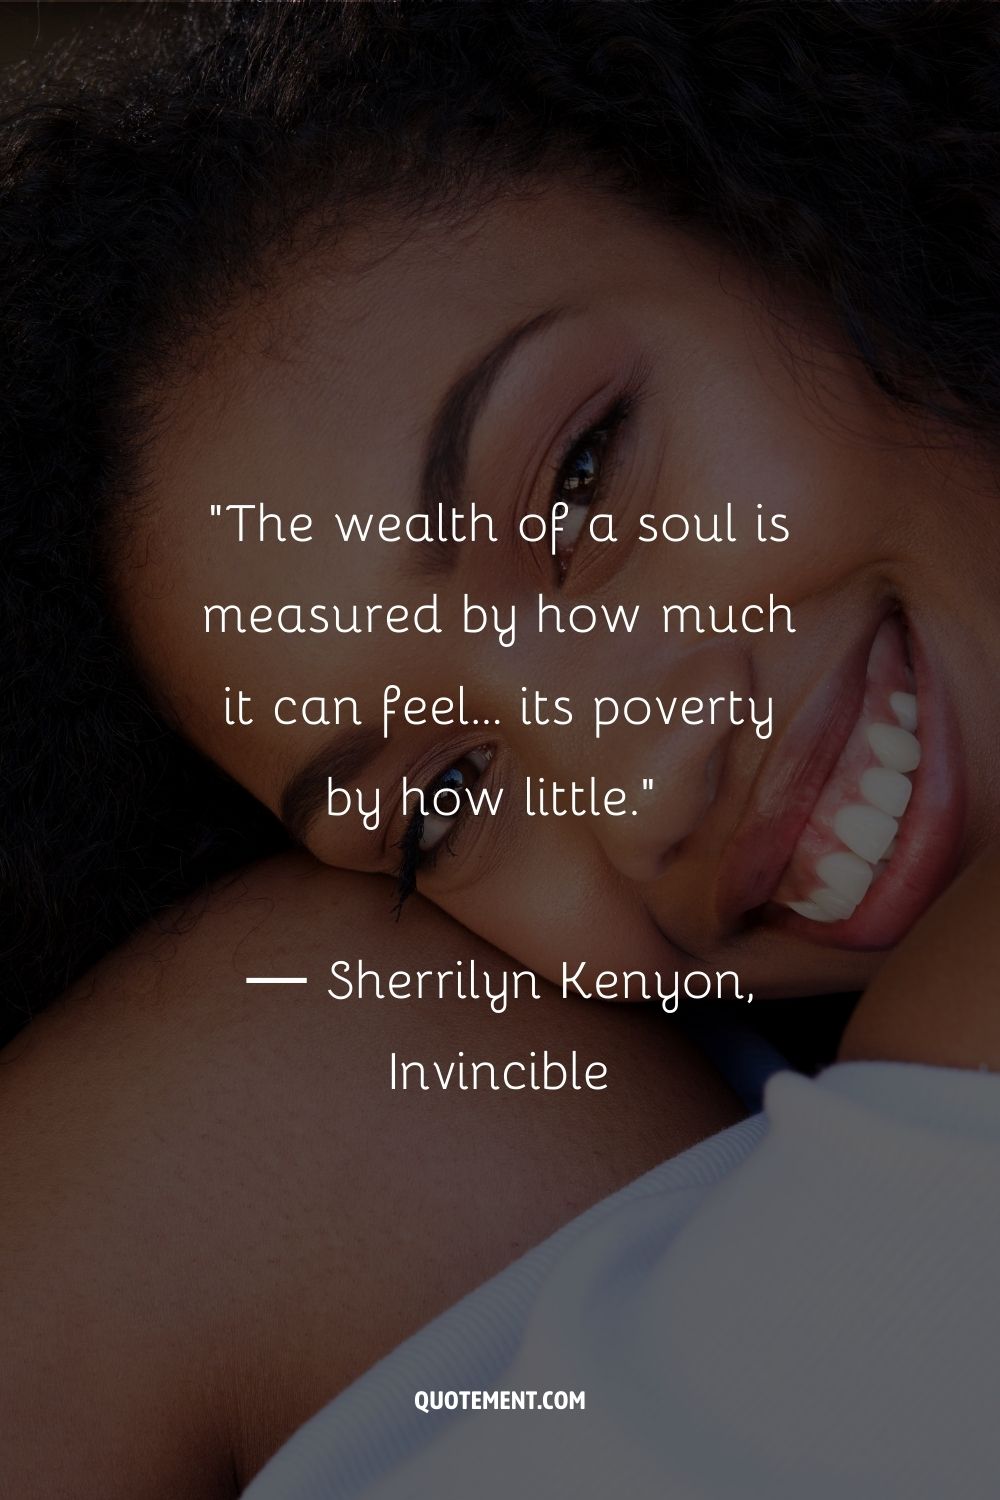 The wealth of a soul is measured by how much it can feel... its poverty by how little